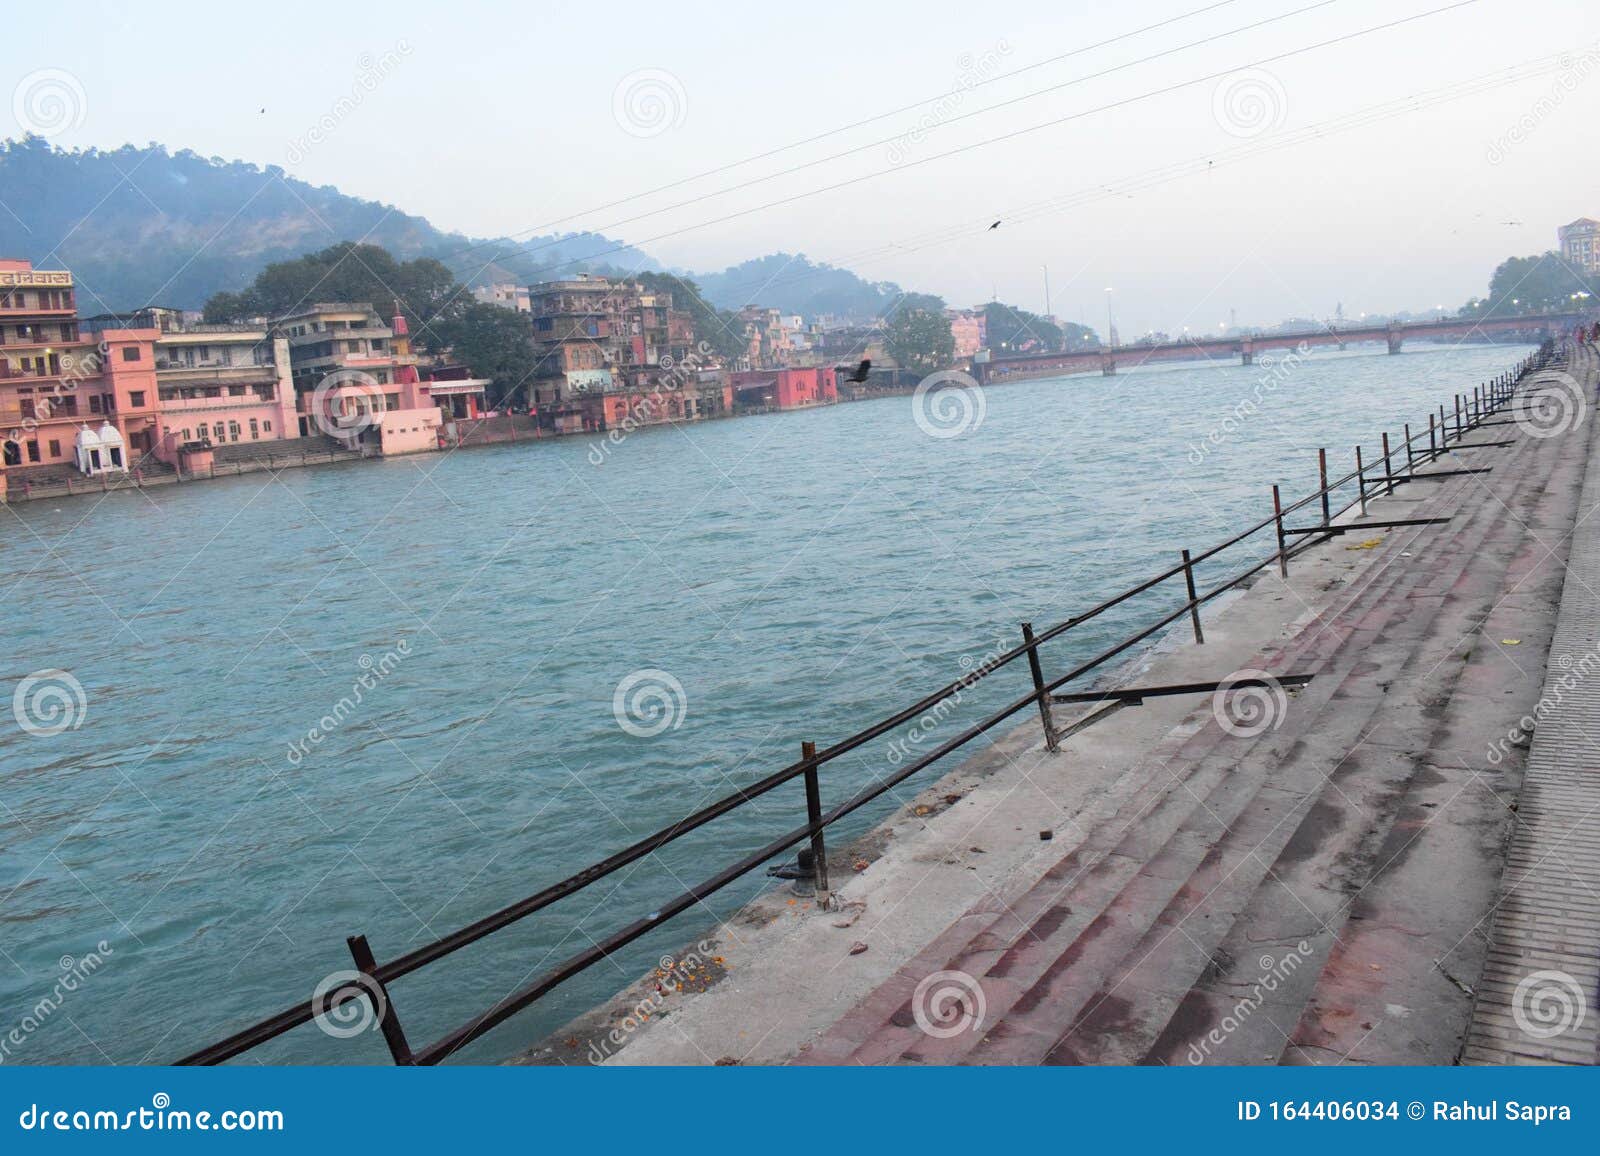 landscape view of ganga river in haridwar, wide ganga view, haridwar ganga view